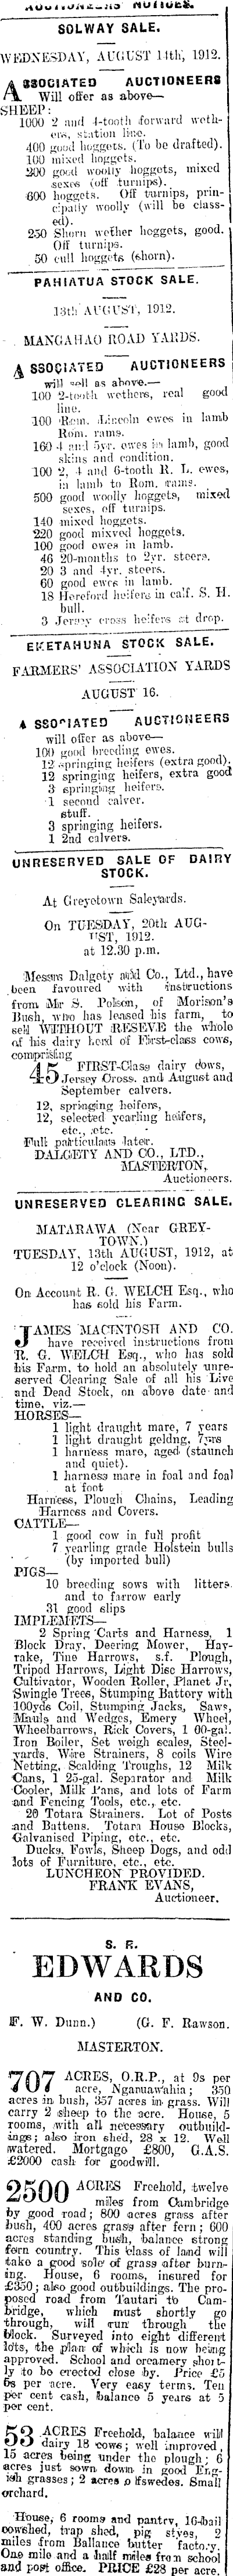 Papers Past Newspapers Wairarapa Age 10 August 1912 Page 8 Advertisements Column 1